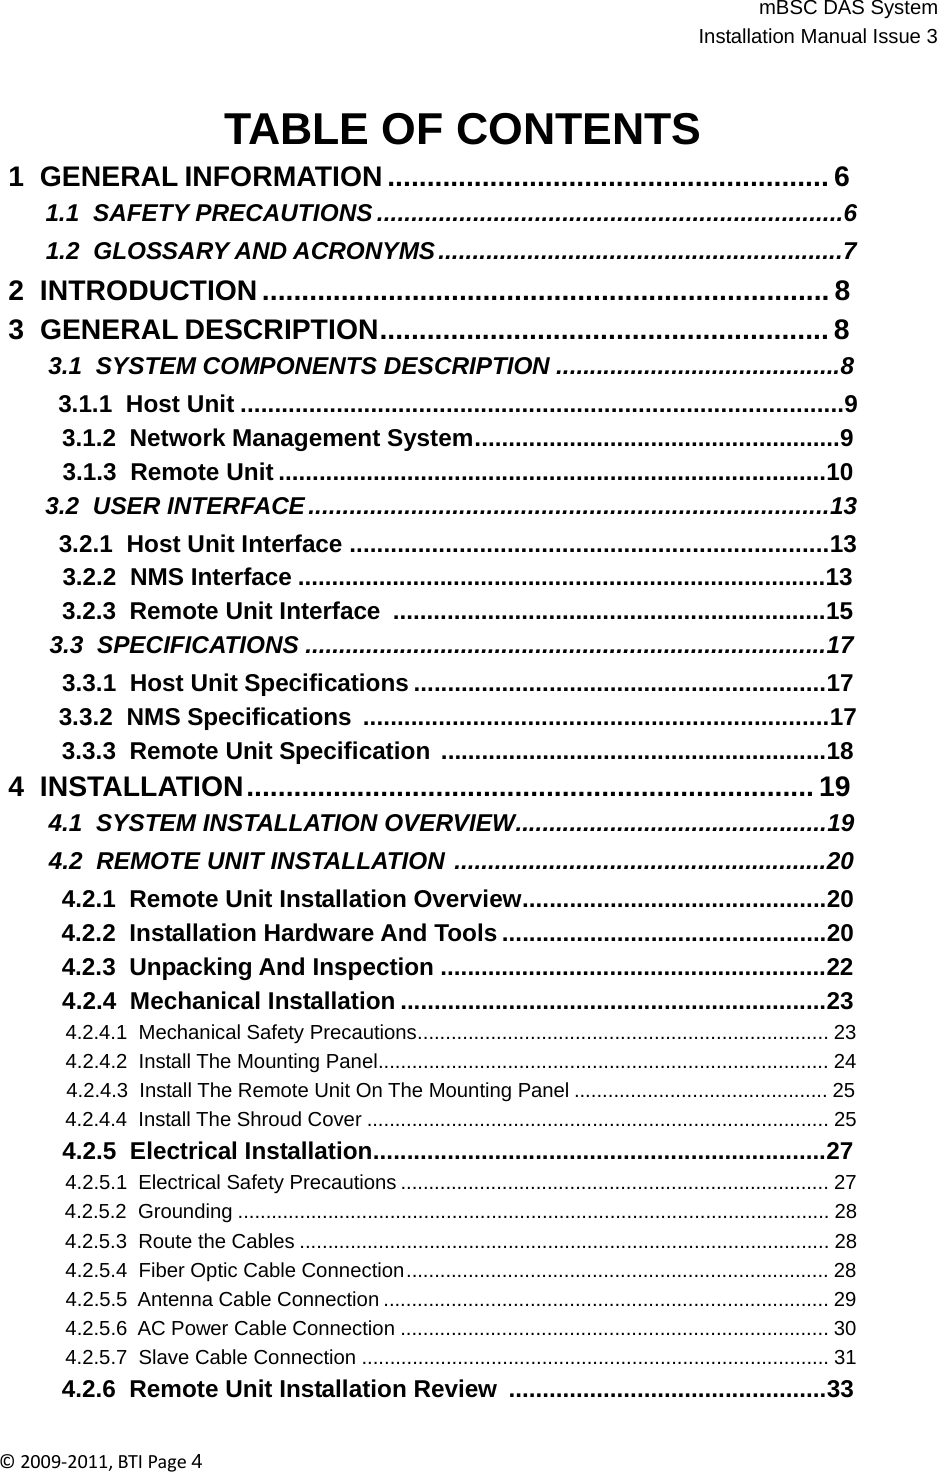 mBSC DAS SystemInstallation Manual Issue 3©2009‐2011,BTIPage4   TABLE OF CONTENTS 1 GENERAL INFORMATION ........................................................ 6 1.1  SAFETY PRECAUTIONS ....................................................................6 1.2  GLOSSARY AND ACRONYMS ...........................................................7 2 INTRODUCTION ........................................................................ 8 3  GENERAL DESCRIPTION ......................................................... 8 3.1  SYSTEM COMPONENTS DESCRIPTION ..........................................8 3.1.1  Host Unit ........................................................................................9 3.1.2  Network Management System......................................................9 3.1.3  Remote Unit .................................................................................10 3.2  USER INTERFACE ............................................................................13 3.2.1  Host Unit Interface ......................................................................13 3.2.2  NMS Interface ..............................................................................13 3.2.3  Remote Unit Interface  ................................................................15 3.3  SPECIFICATIONS .............................................................................17 3.3.1  Host Unit Specifications .............................................................17 3.3.2  NMS Specifications  ....................................................................17 3.3.3  Remote Unit Specification .........................................................18 4 INSTALLATION ........................................................................ 19 4.1  SYSTEM INSTALLATION OVERVIEW..............................................19 4.2  REMOTE UNIT INSTALLATION .......................................................20 4.2.1  Remote Unit Installation Overview.............................................20 4.2.2  Installation Hardware And Tools ................................................20 4.2.3  Unpacking And Inspection .........................................................22 4.2.4  Mechanical Installation ...............................................................23 4.2.4.1  Mechanical Safety Precautions......................................................................... 23 4.2.4.2  Install The Mounting Panel................................................................................ 24 4.2.4.3  Install The Remote Unit On The Mounting Panel ............................................. 25 4.2.4.4  Install The Shroud Cover .................................................................................. 25 4.2.5  Electrical Installation...................................................................27 4.2.5.1  Electrical Safety Precautions ............................................................................ 27 4.2.5.2  Grounding ......................................................................................................... 28 4.2.5.3  Route the Cables .............................................................................................. 28 4.2.5.4  Fiber Optic Cable Connection ........................................................................... 28 4.2.5.5  Antenna Cable Connection ............................................................................... 29 4.2.5.6  AC Power Cable Connection ............................................................................ 30 4.2.5.7  Slave Cable Connection ................................................................................... 31 4.2.6  Remote Unit Installation Review  ...............................................33 